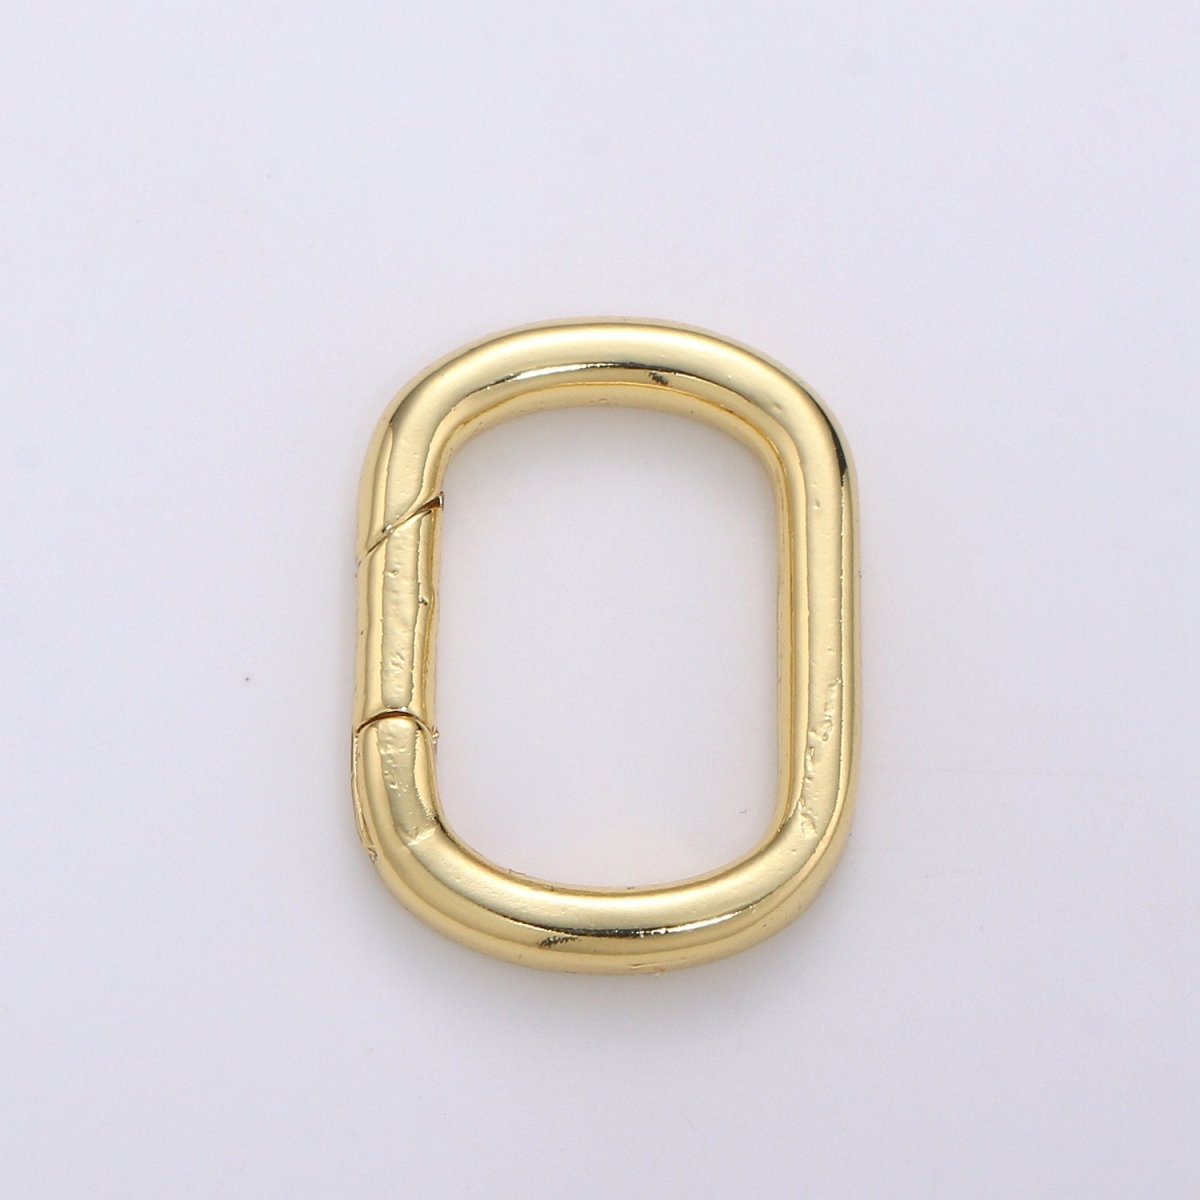 Dainty Gold Spring Gate Ring, Push Gate ring, 15x20mm Oval Ring, Charm Holder 14K Gold Filled Clasp for Charm Holder Connector L-004 - DLUXCA